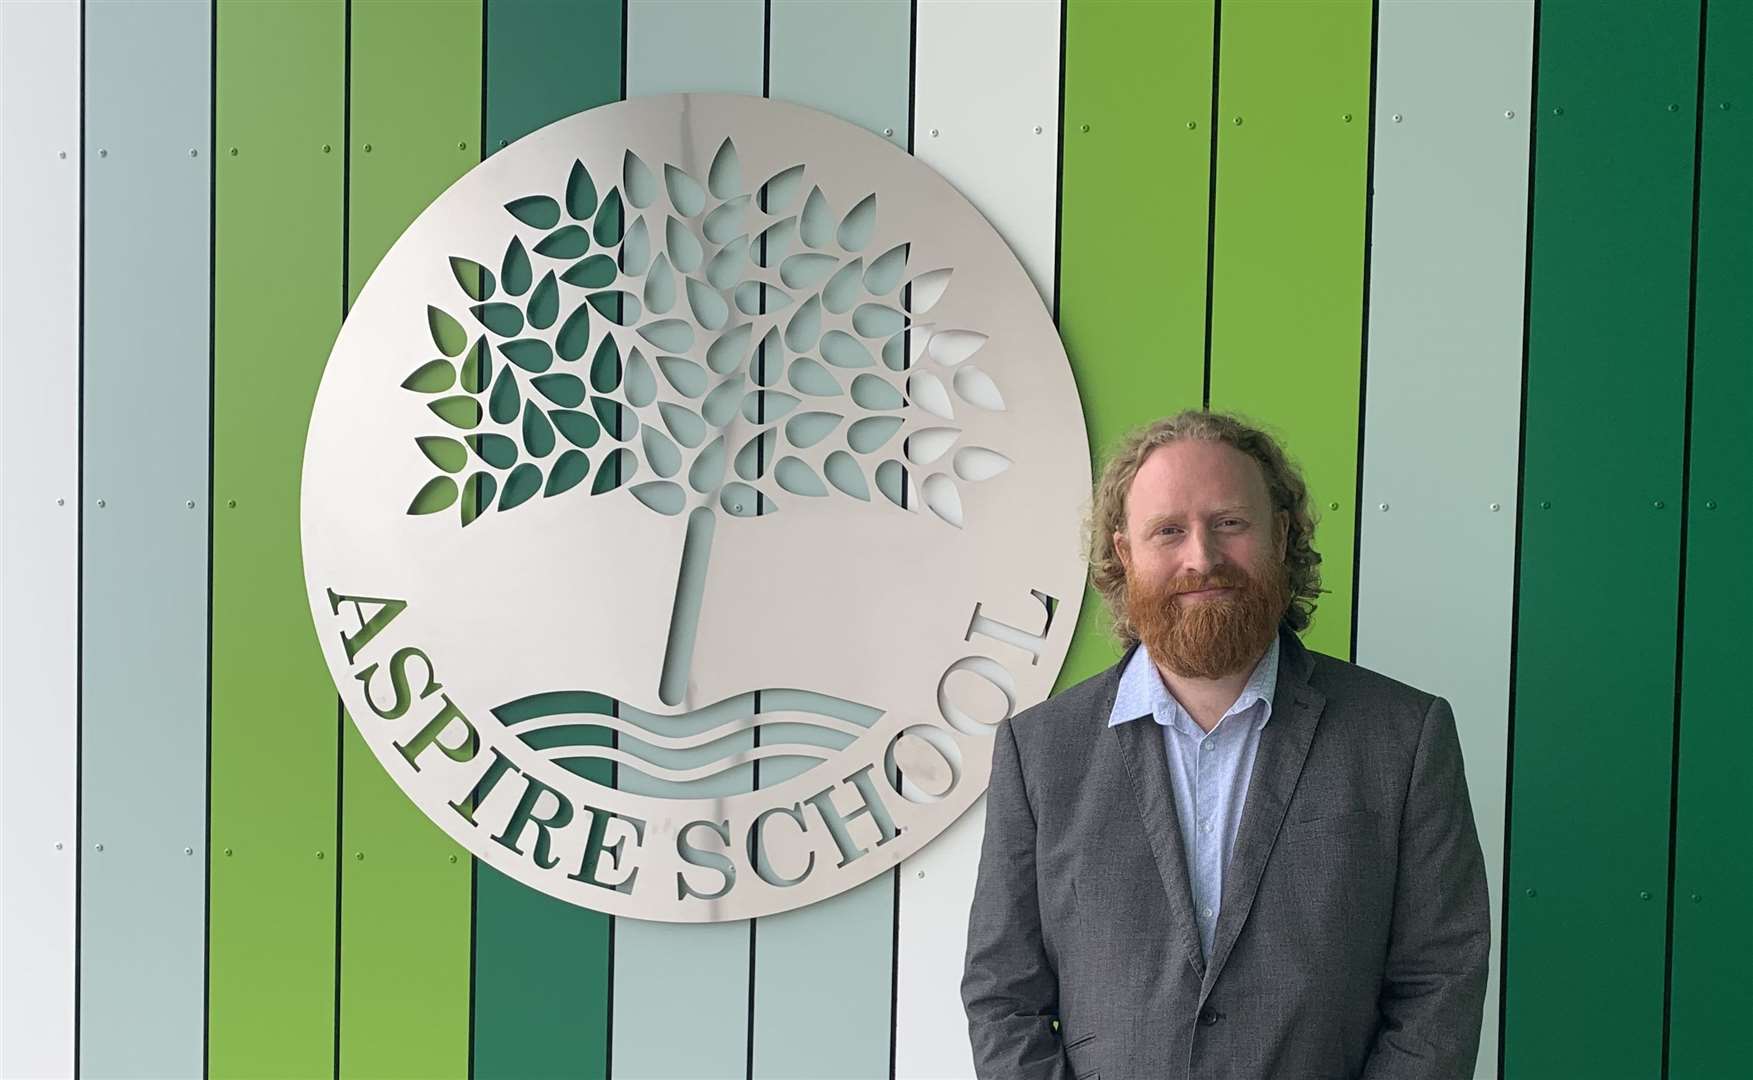 The Aspire School is expected to open in September